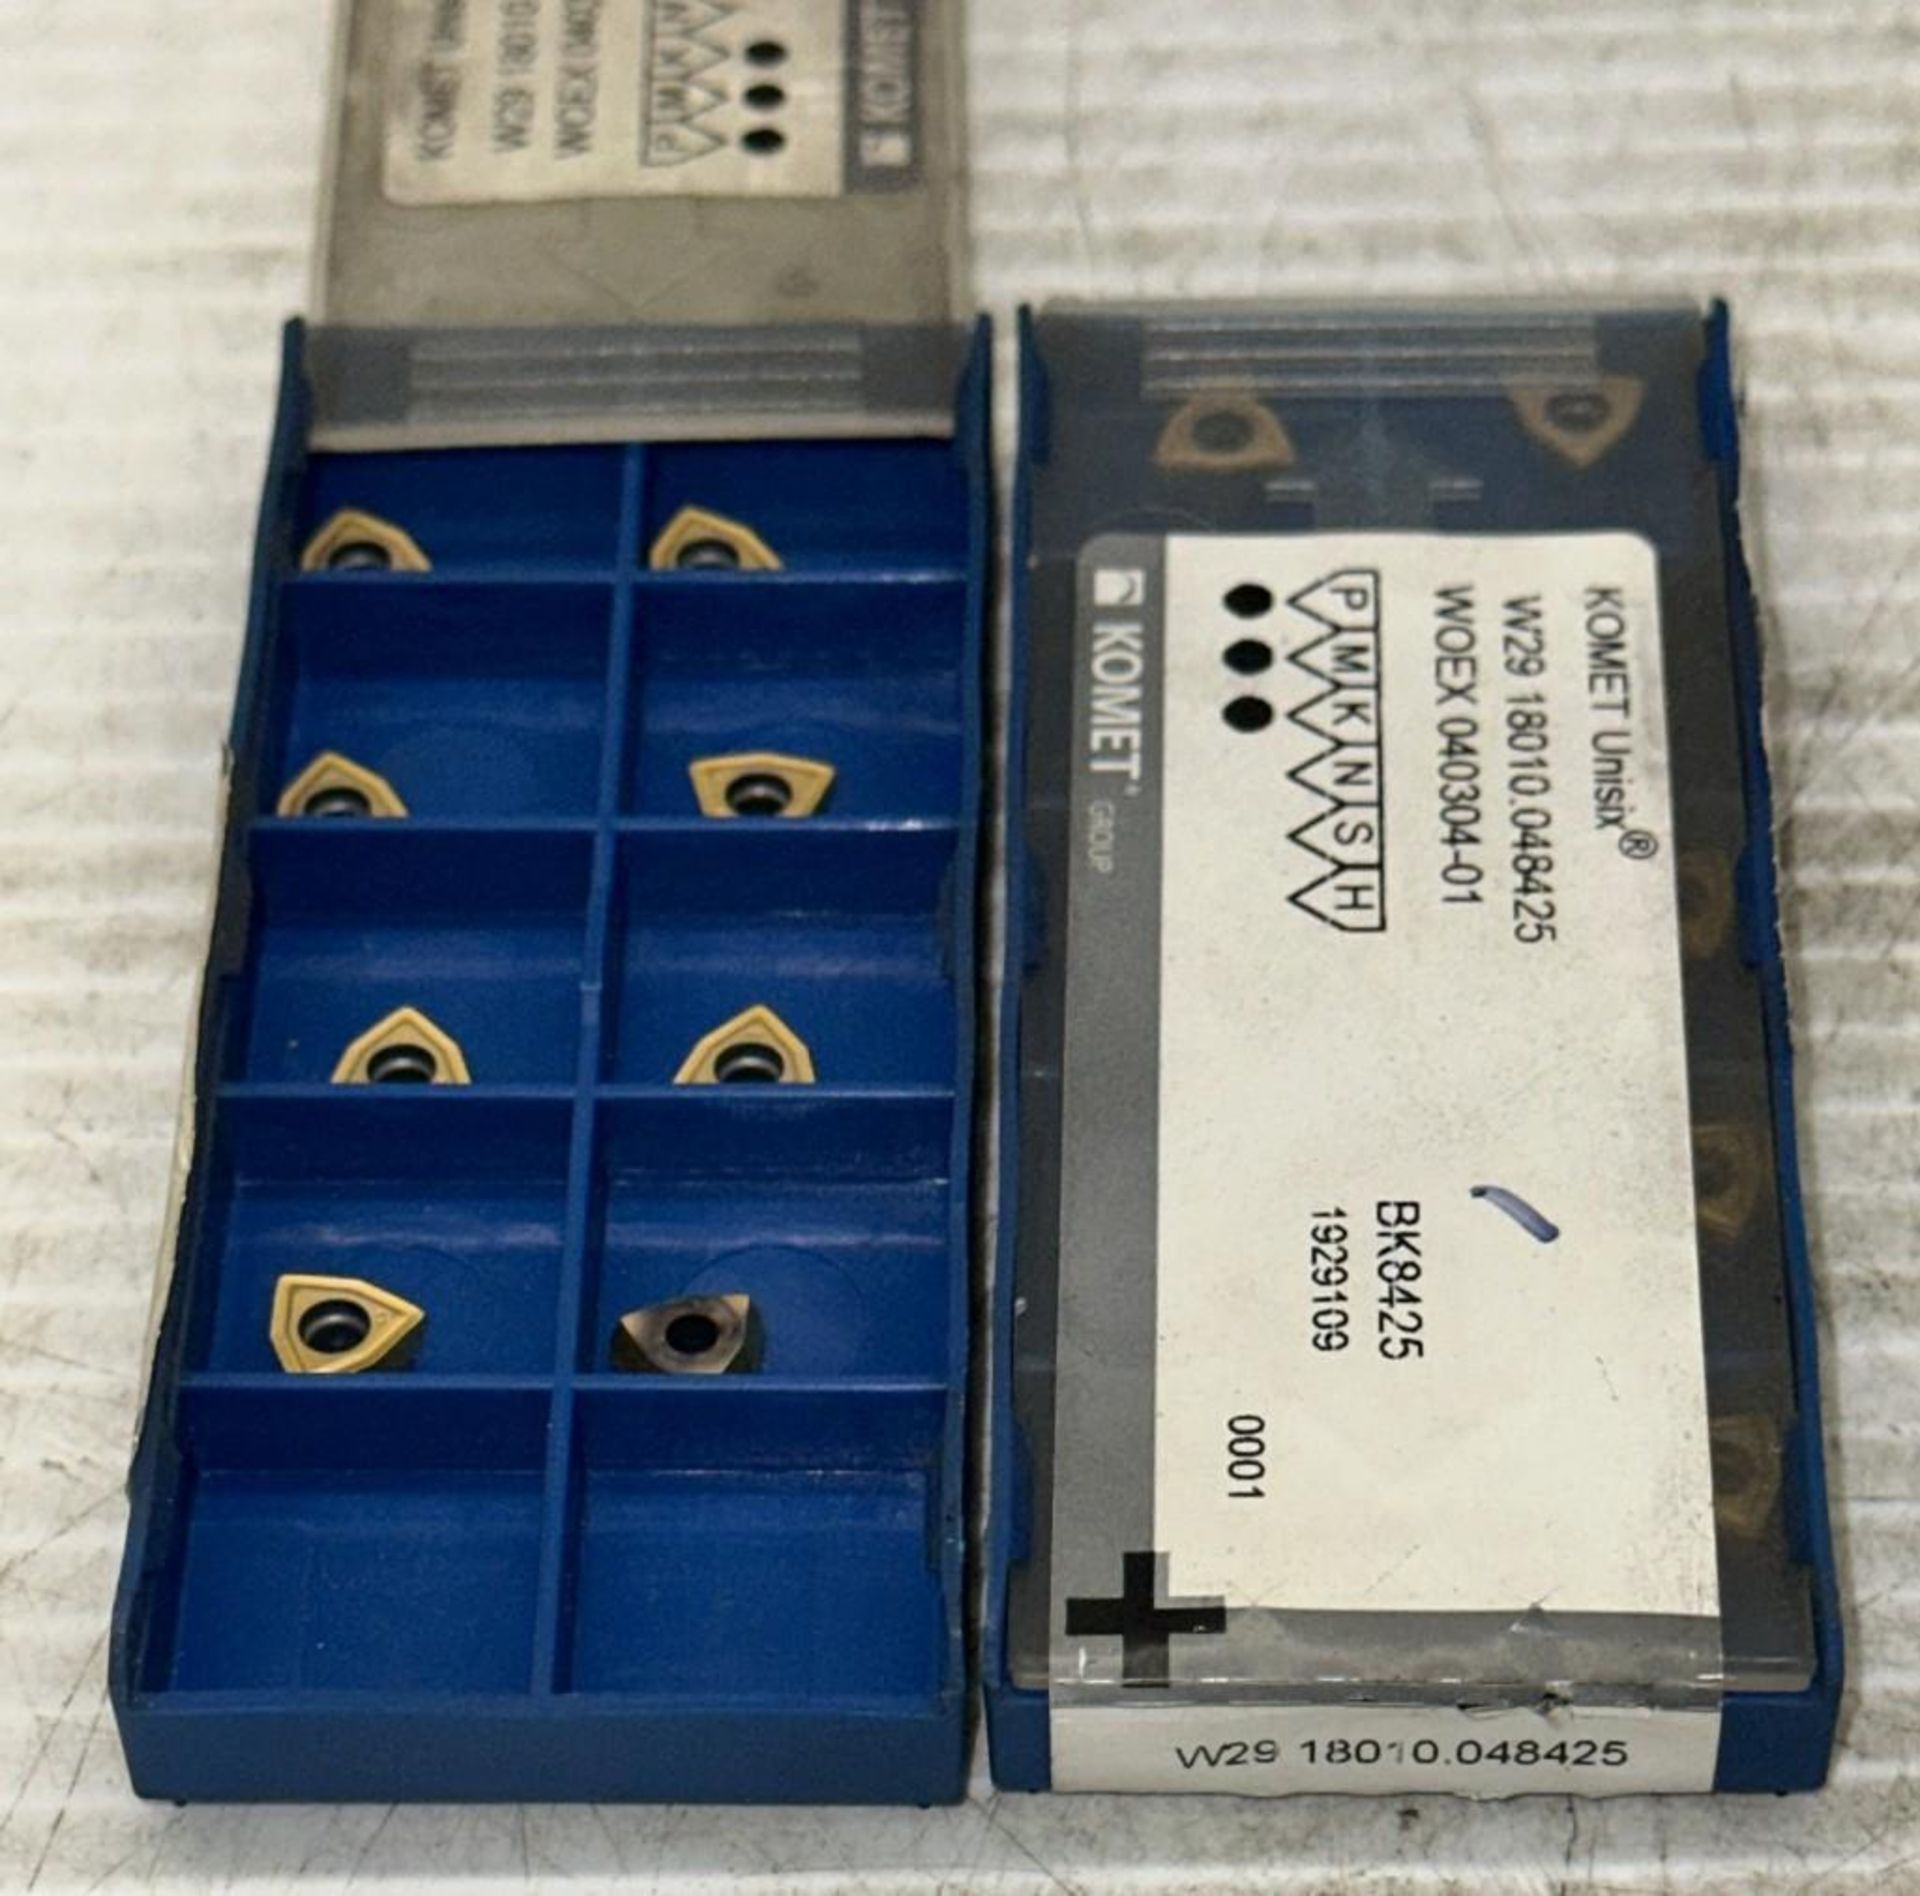 Lot of Komet #W29 18010.048425 Carbide Inserts - Image 2 of 4